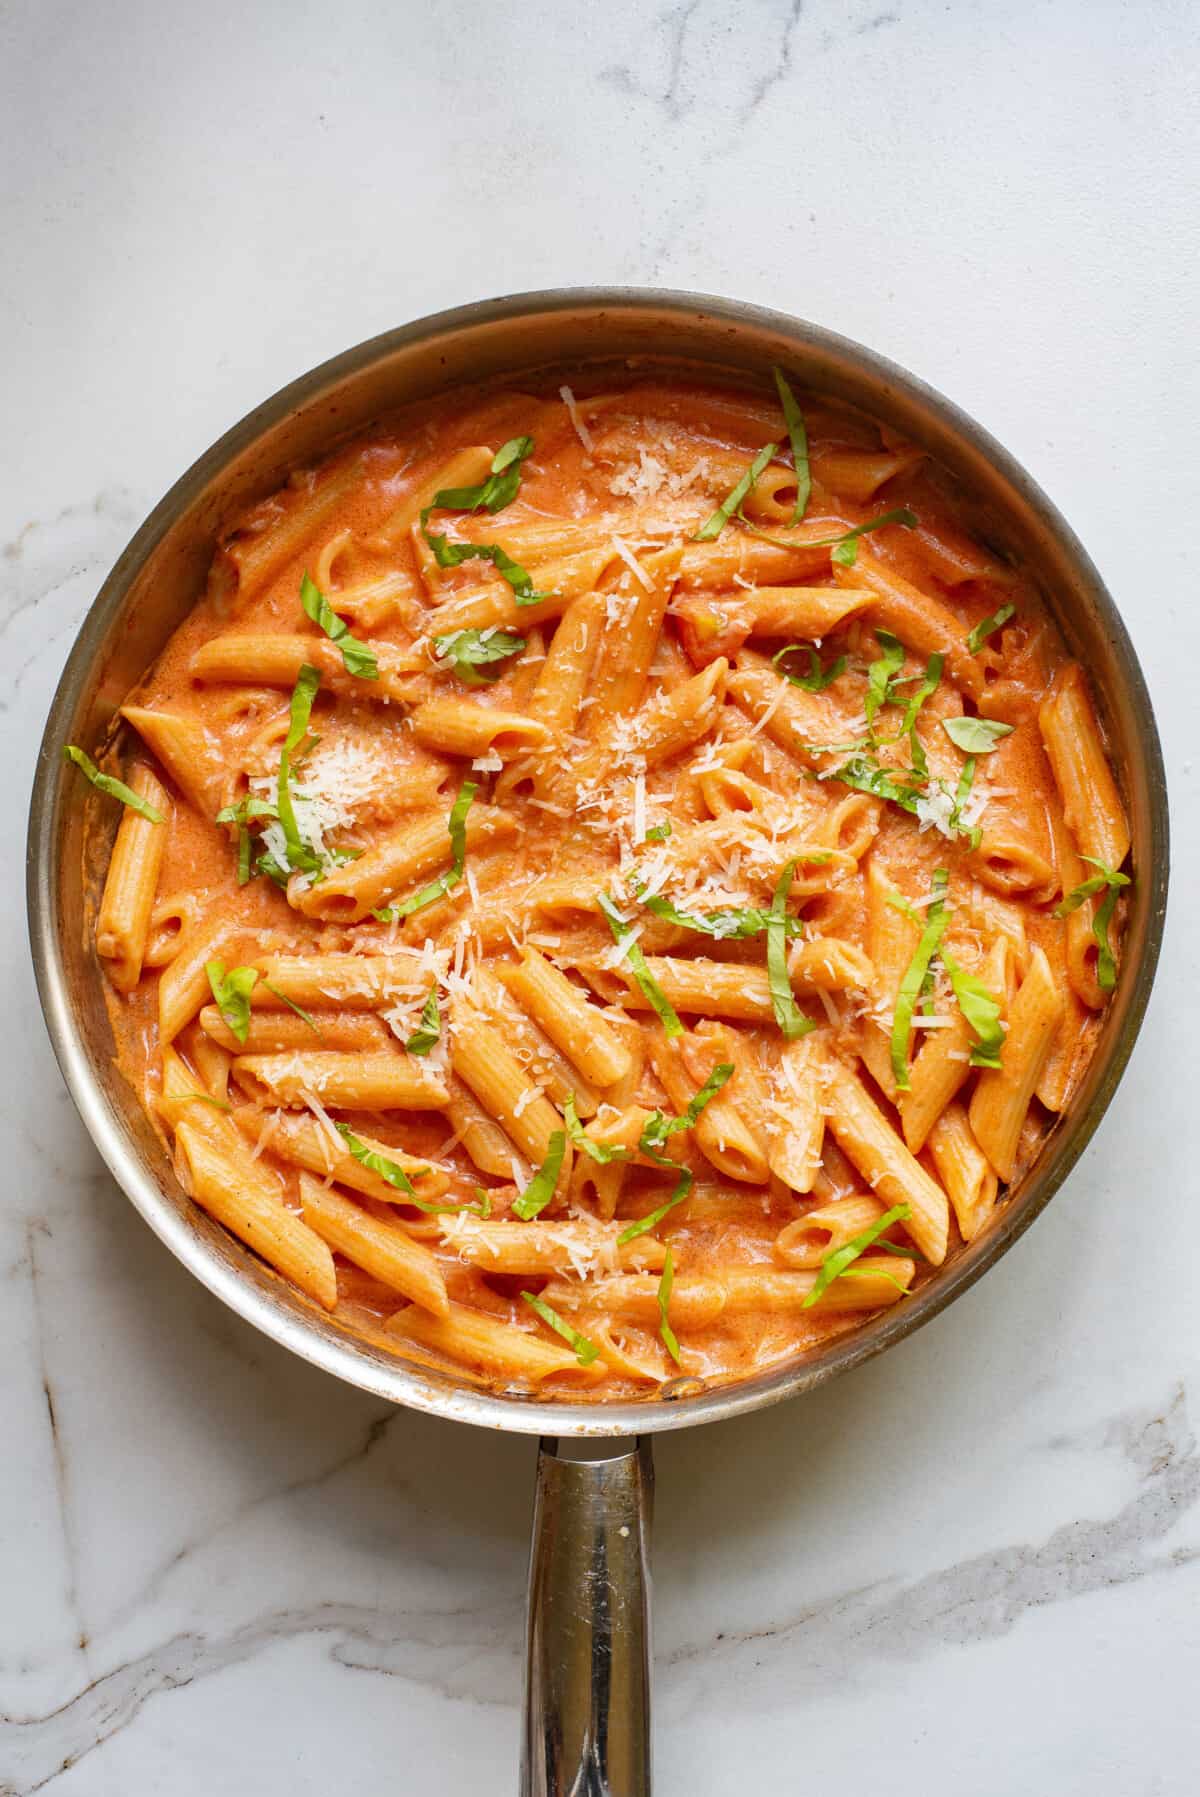 step 4 to make creamy tomato pasta, add in the cooked penne pasta and garnish with fresh basil and more cheese.